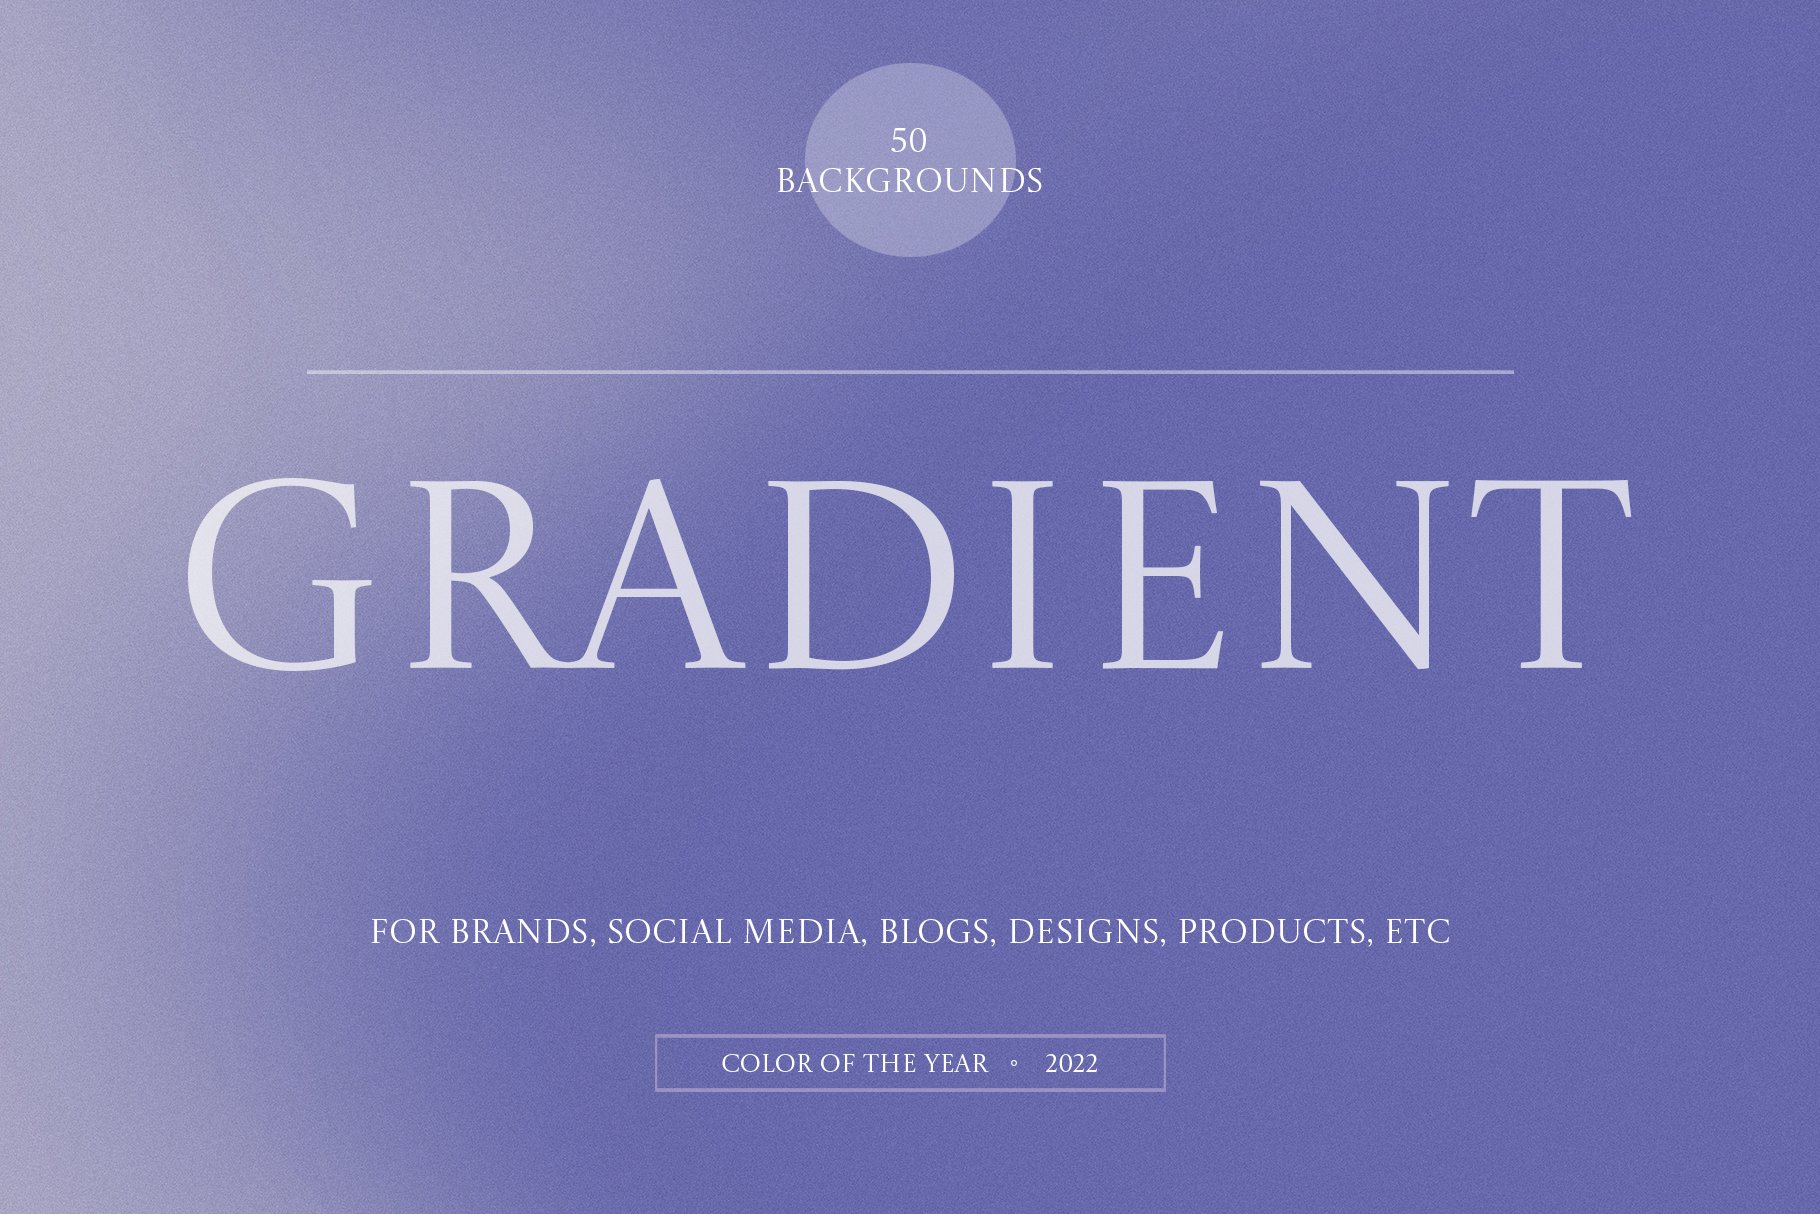 Gradient Background Collection cover image.